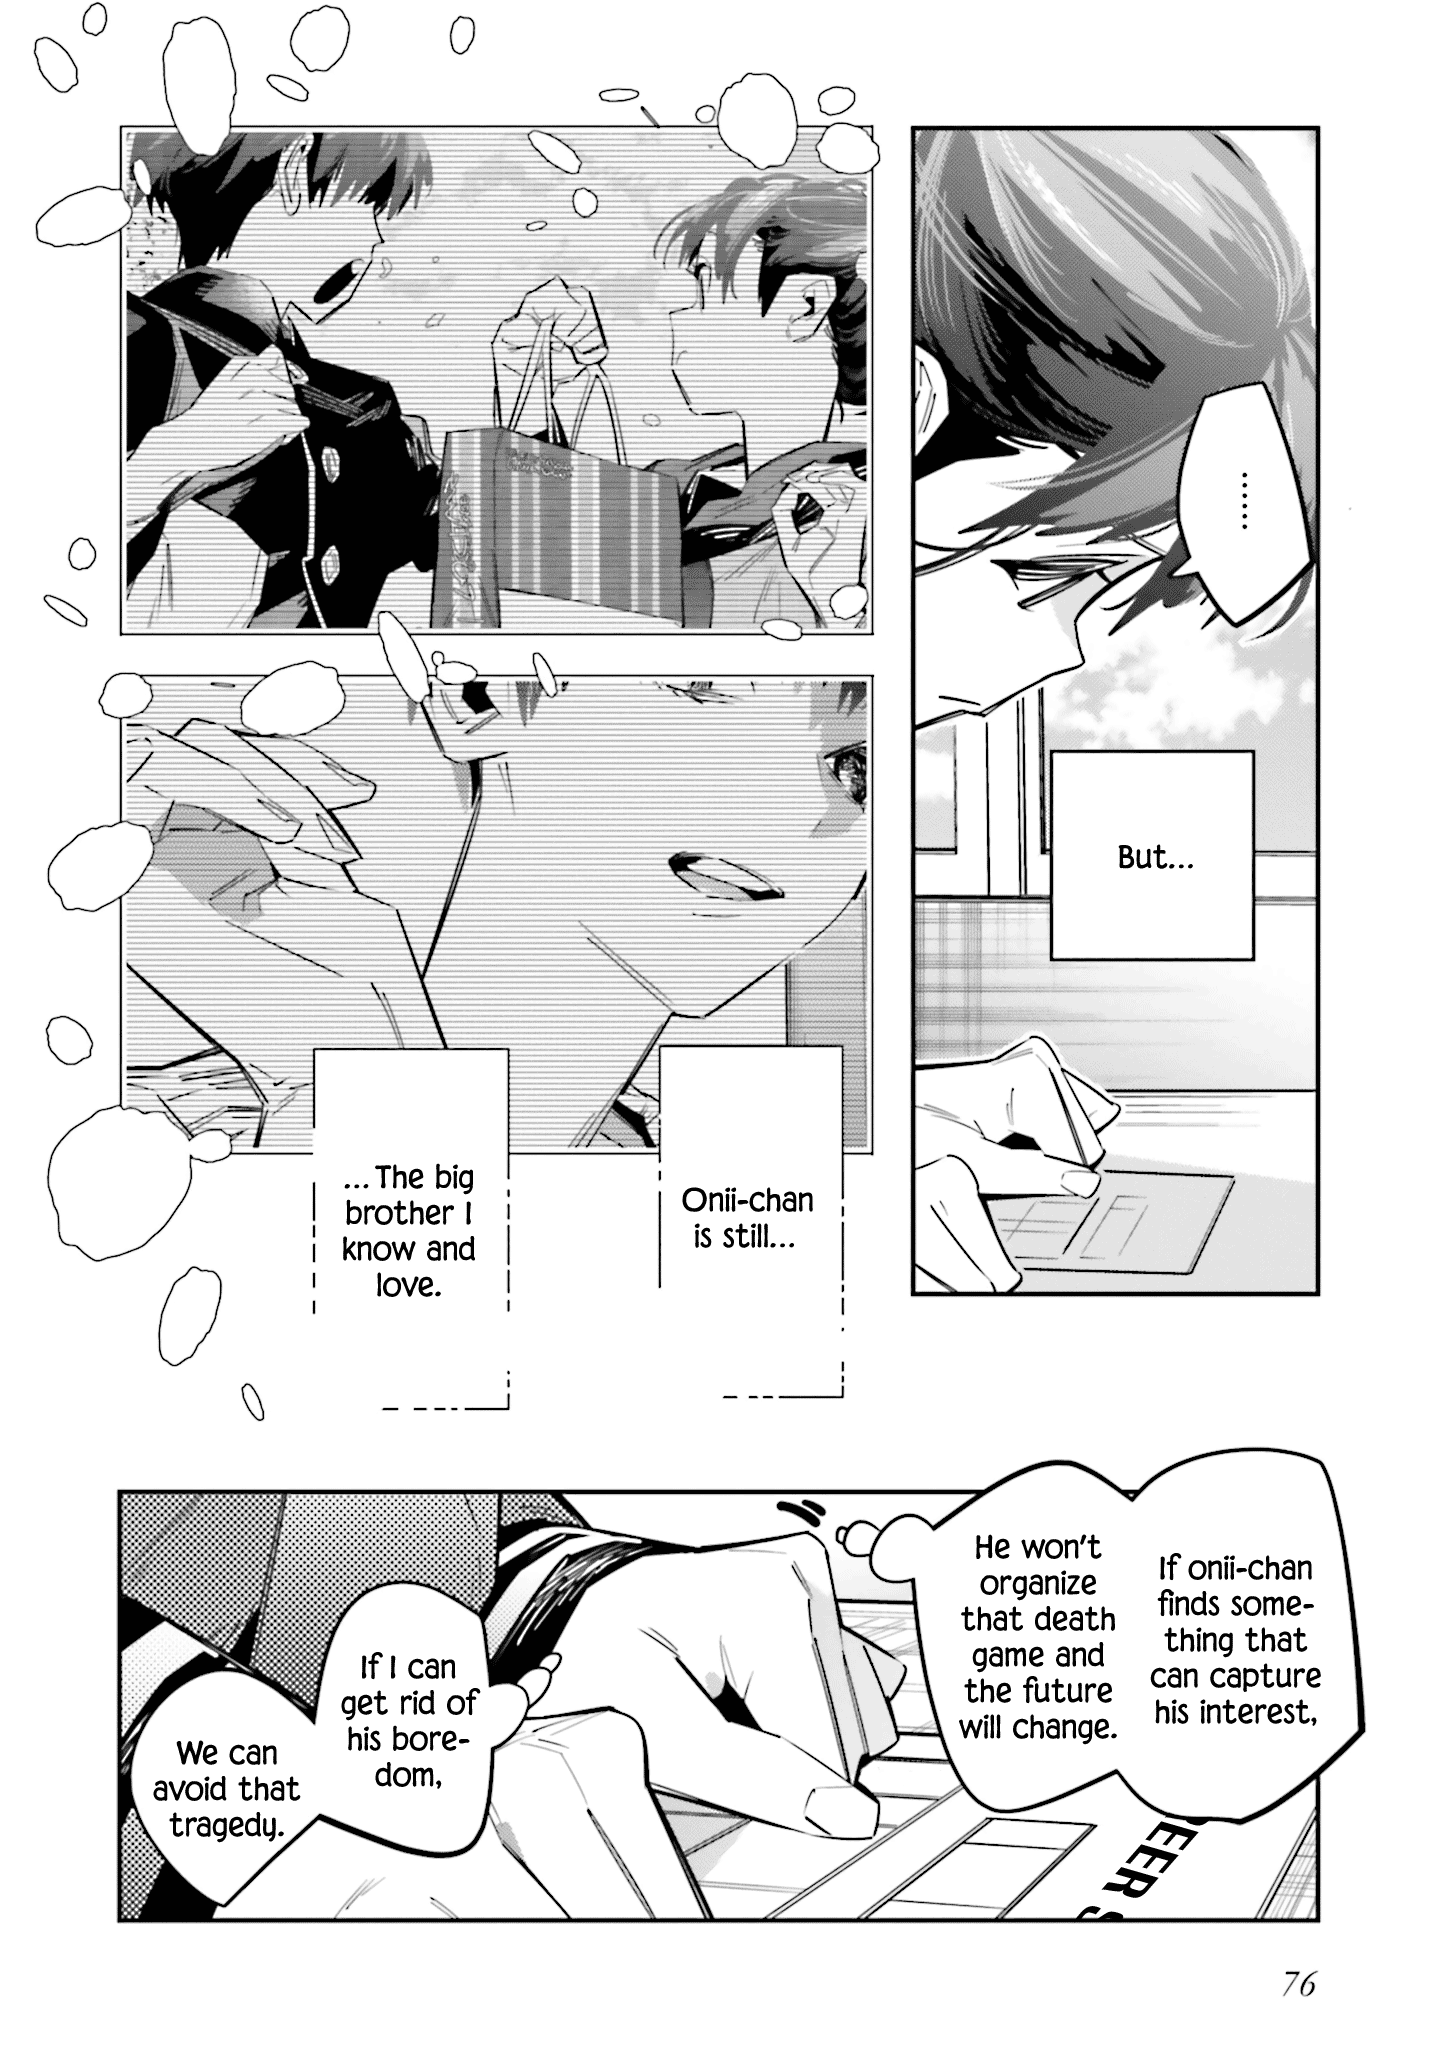 I Reincarnated As The Little Sister Of A Death Game Manga's Murder Mastermind And Failed Chapter 7 #6